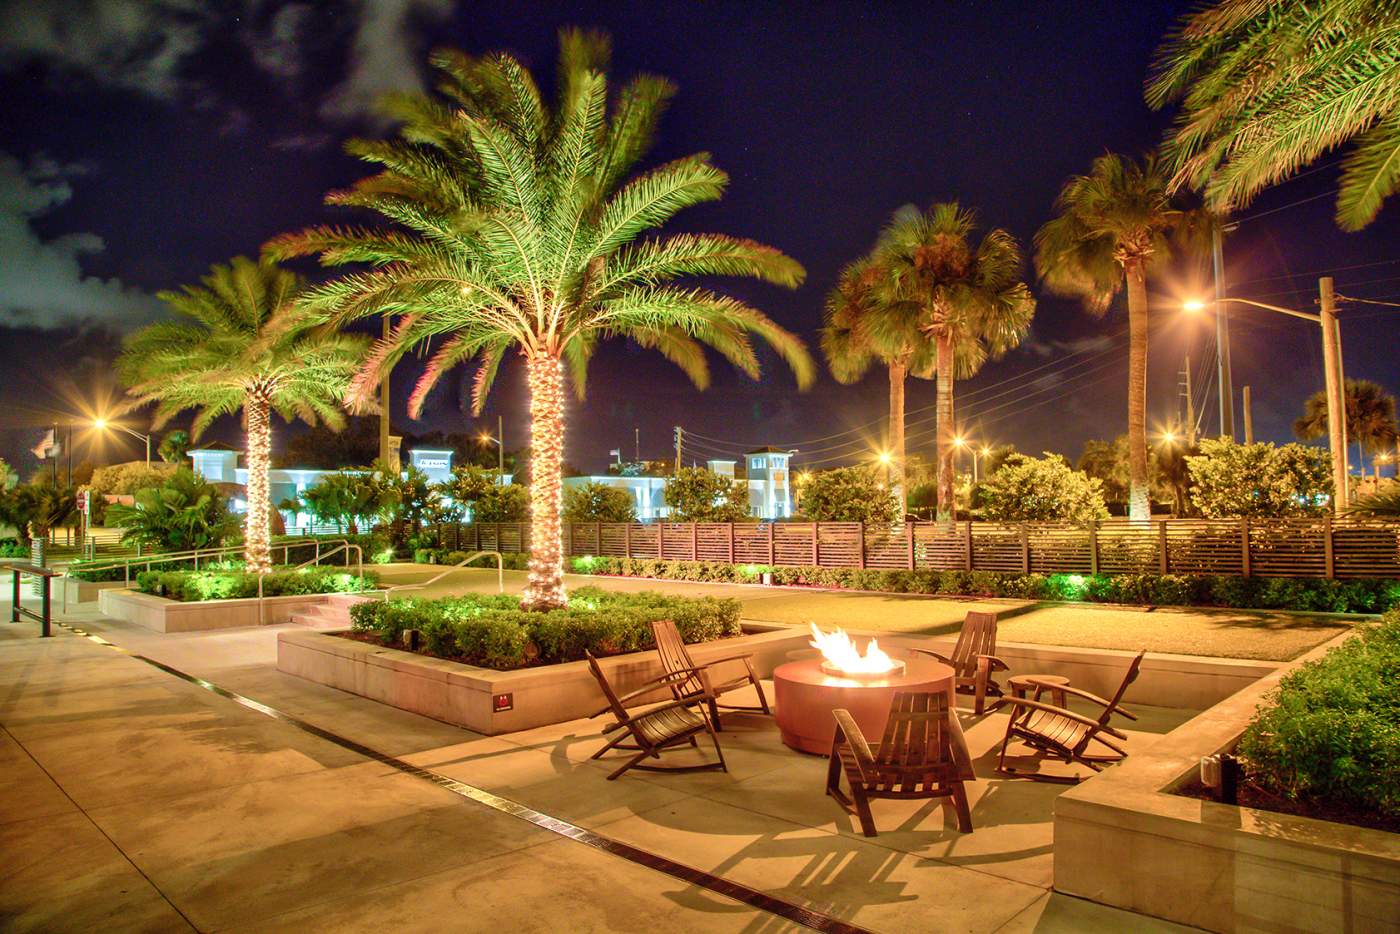 Firepit area and lighted palms at night